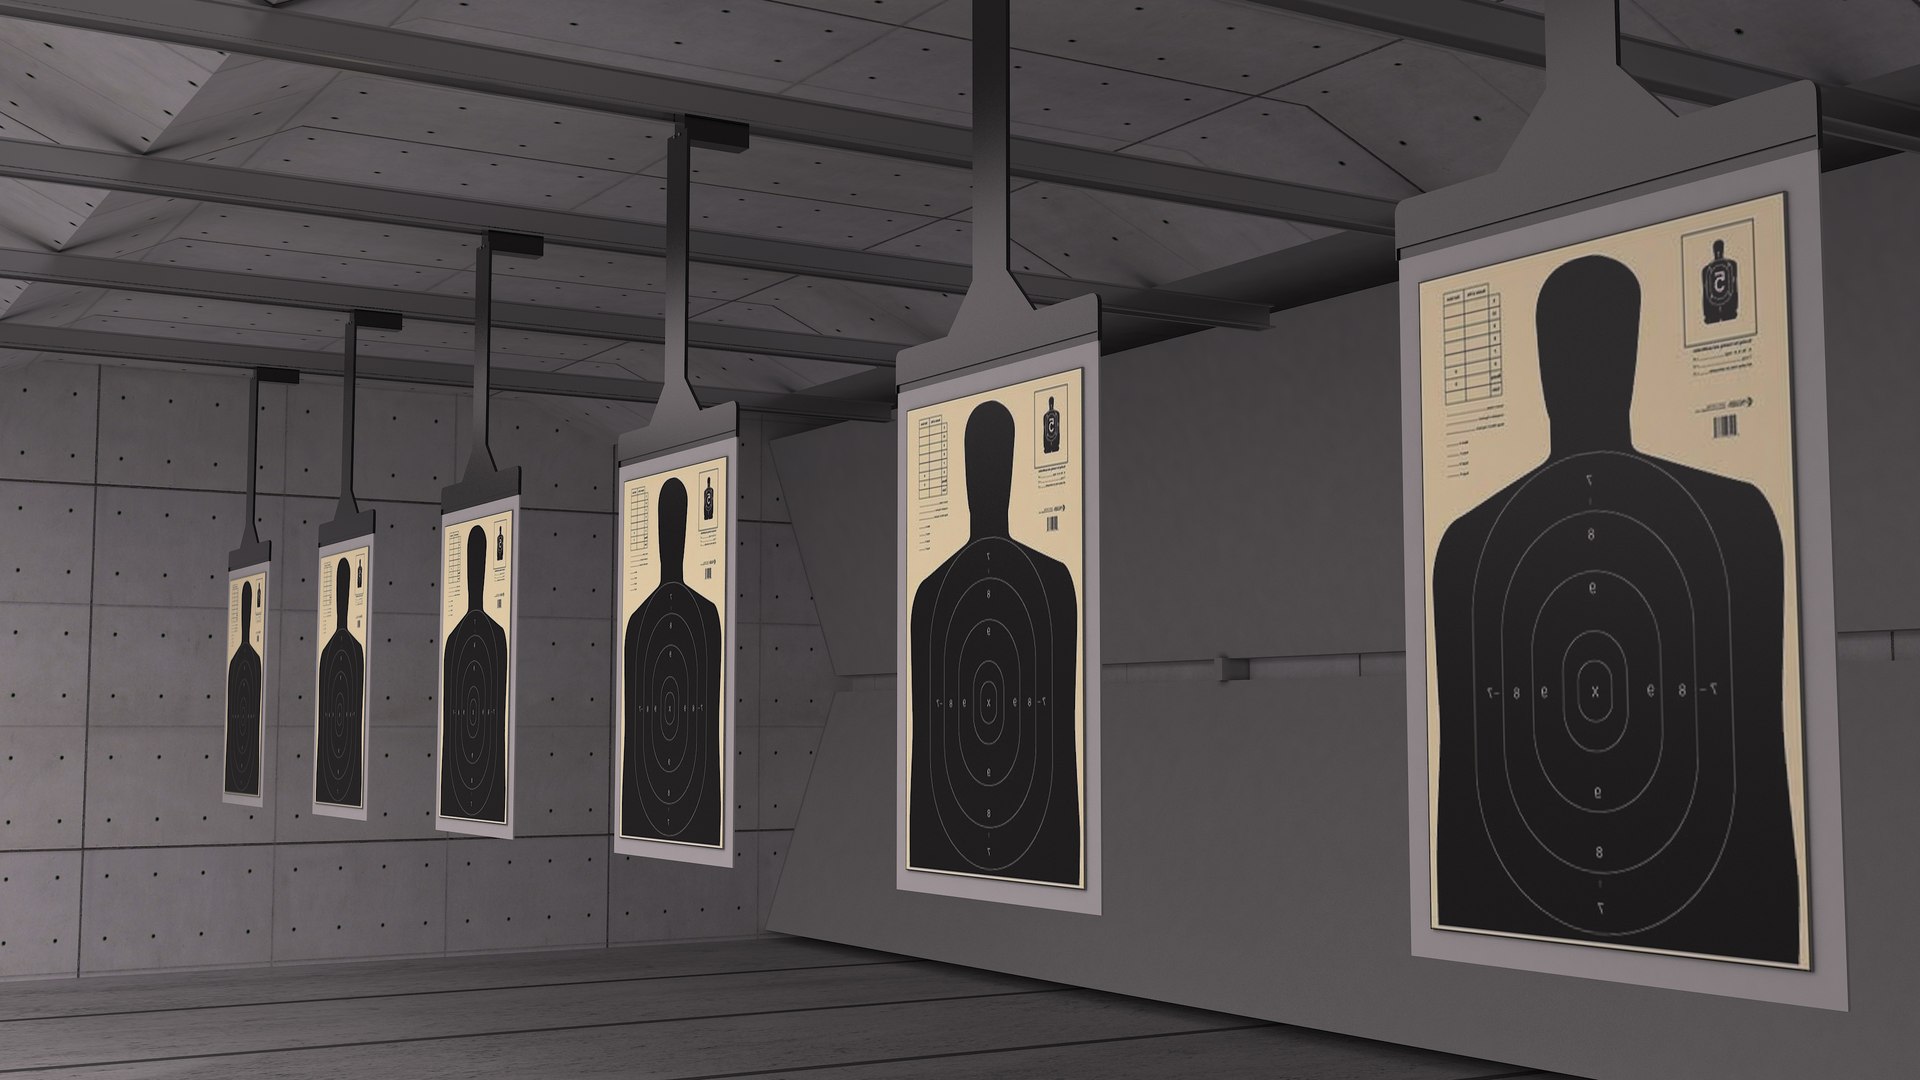 39,912 Shooting Range Images, Stock Photos, 3D objects, & Vectors